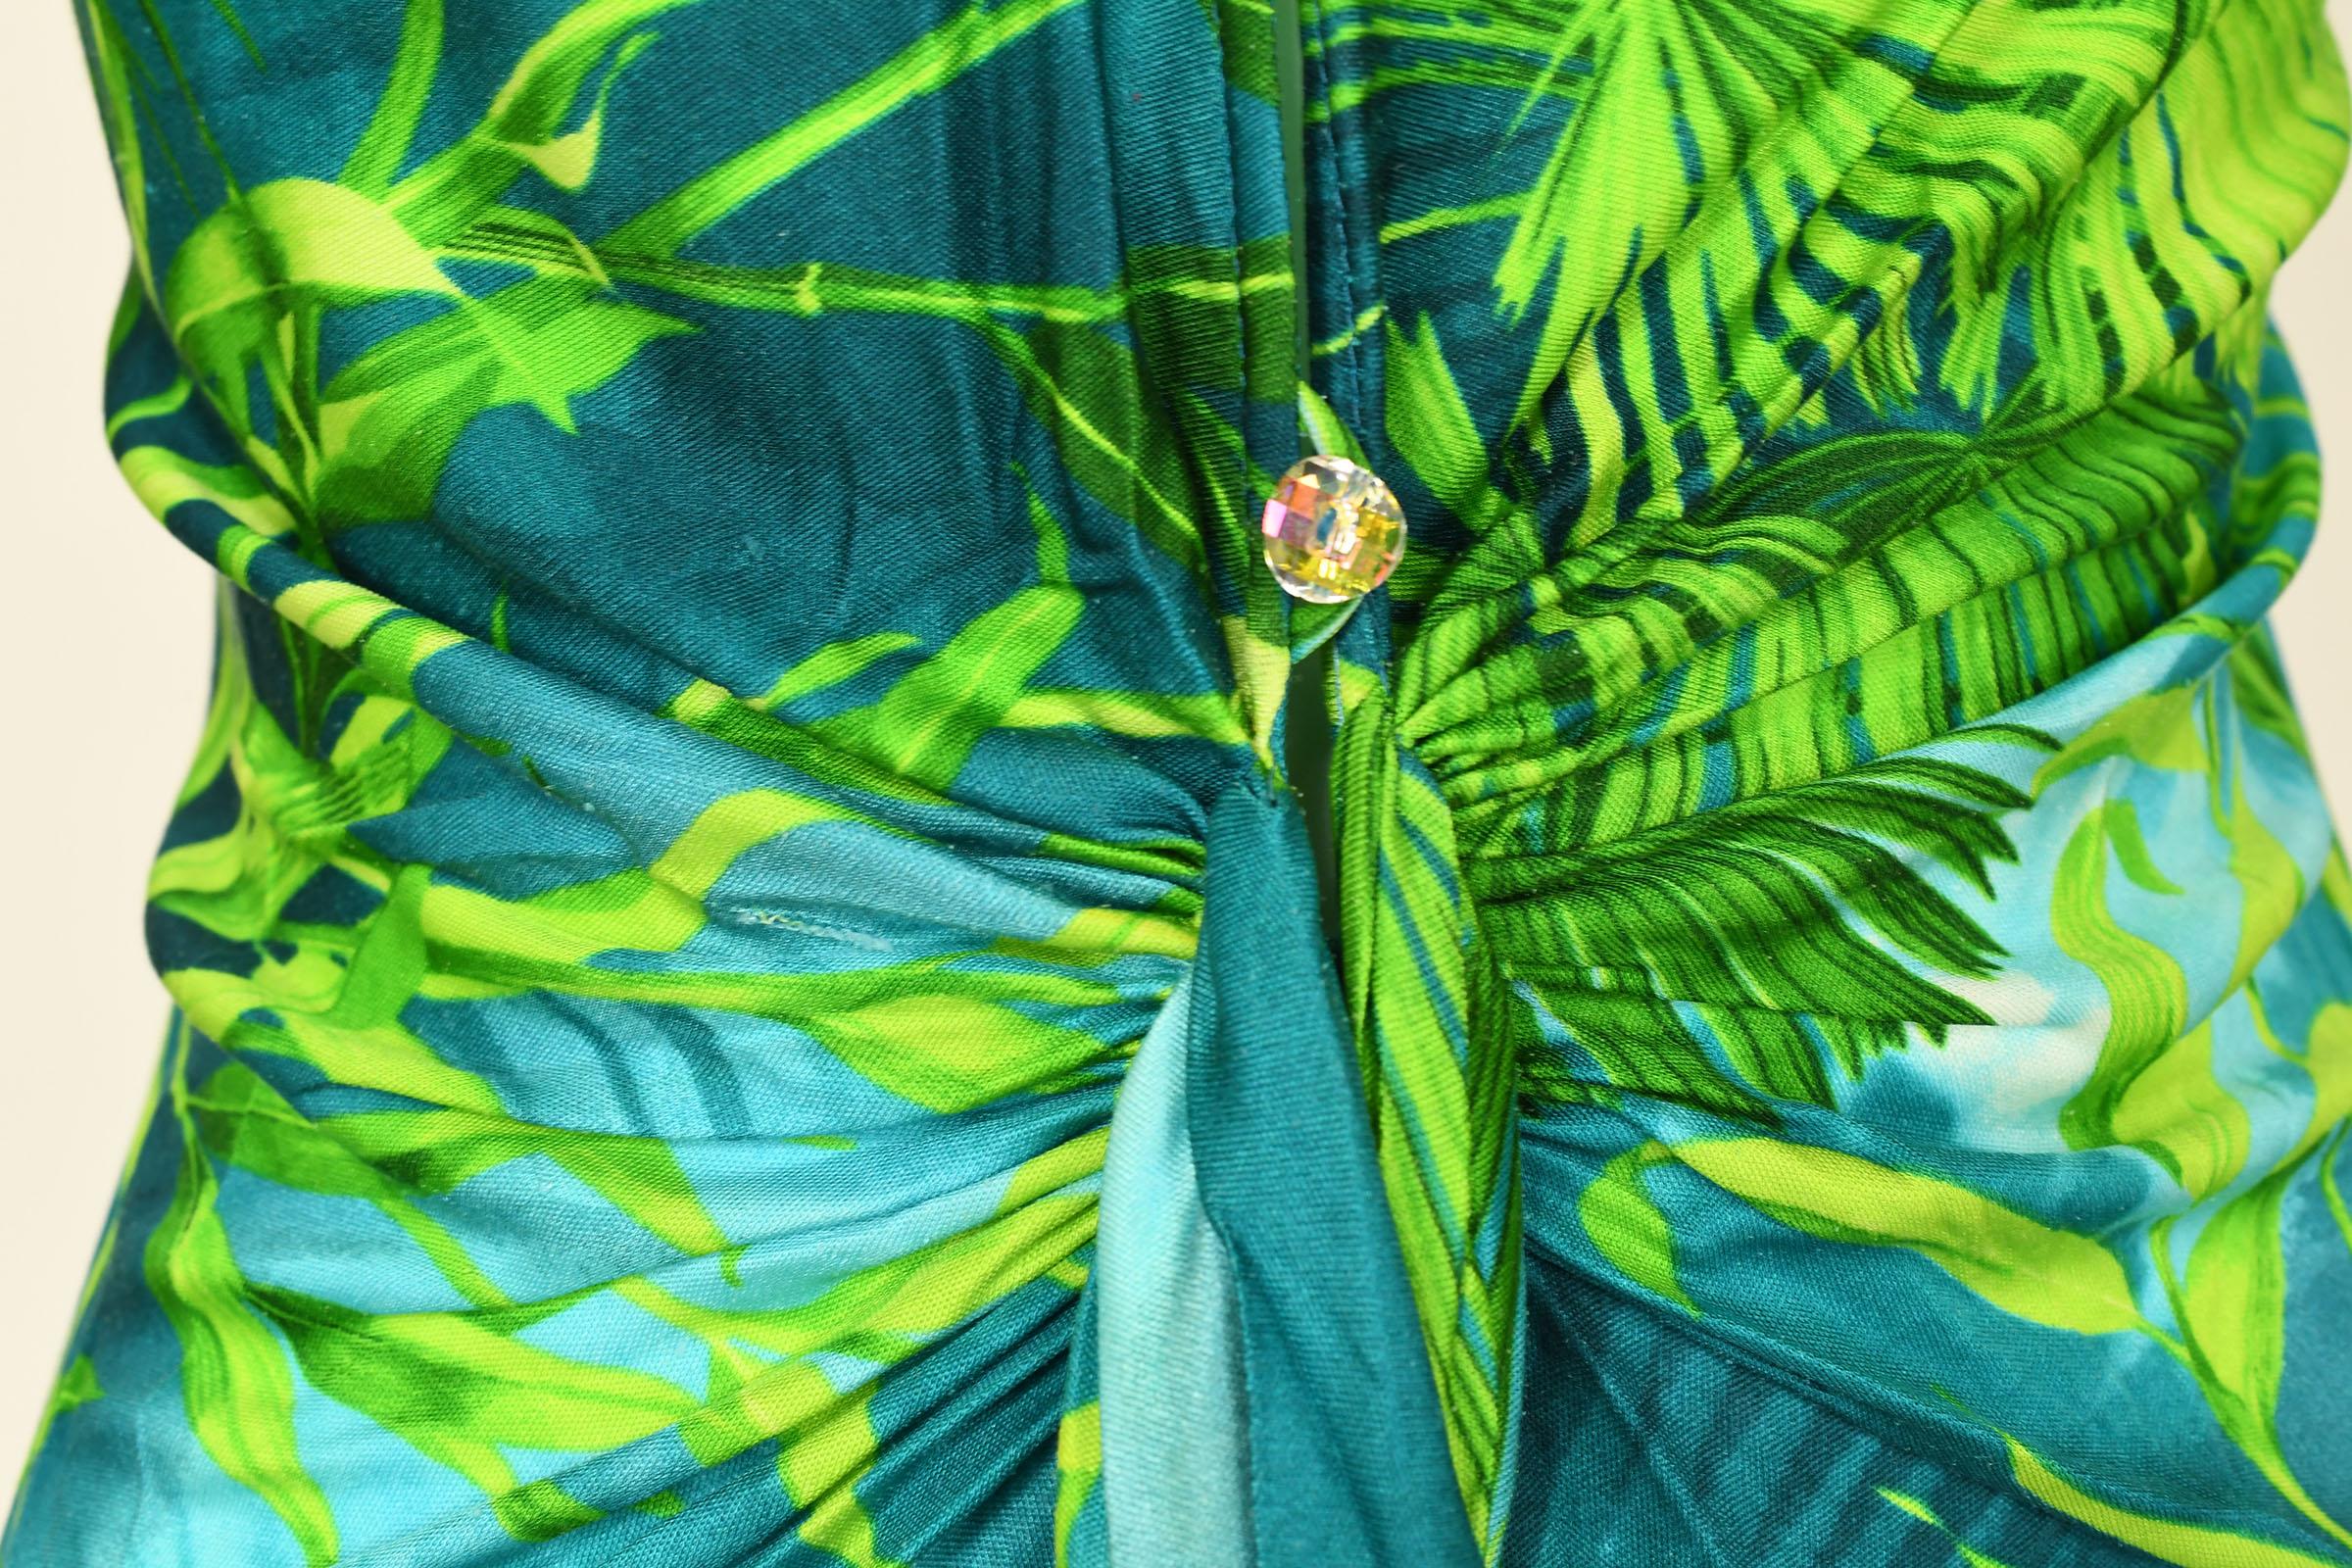 Iconic Gianni Versace Couture Tropical Print Dress - Size IT 40 In Excellent Condition For Sale In Newport, RI